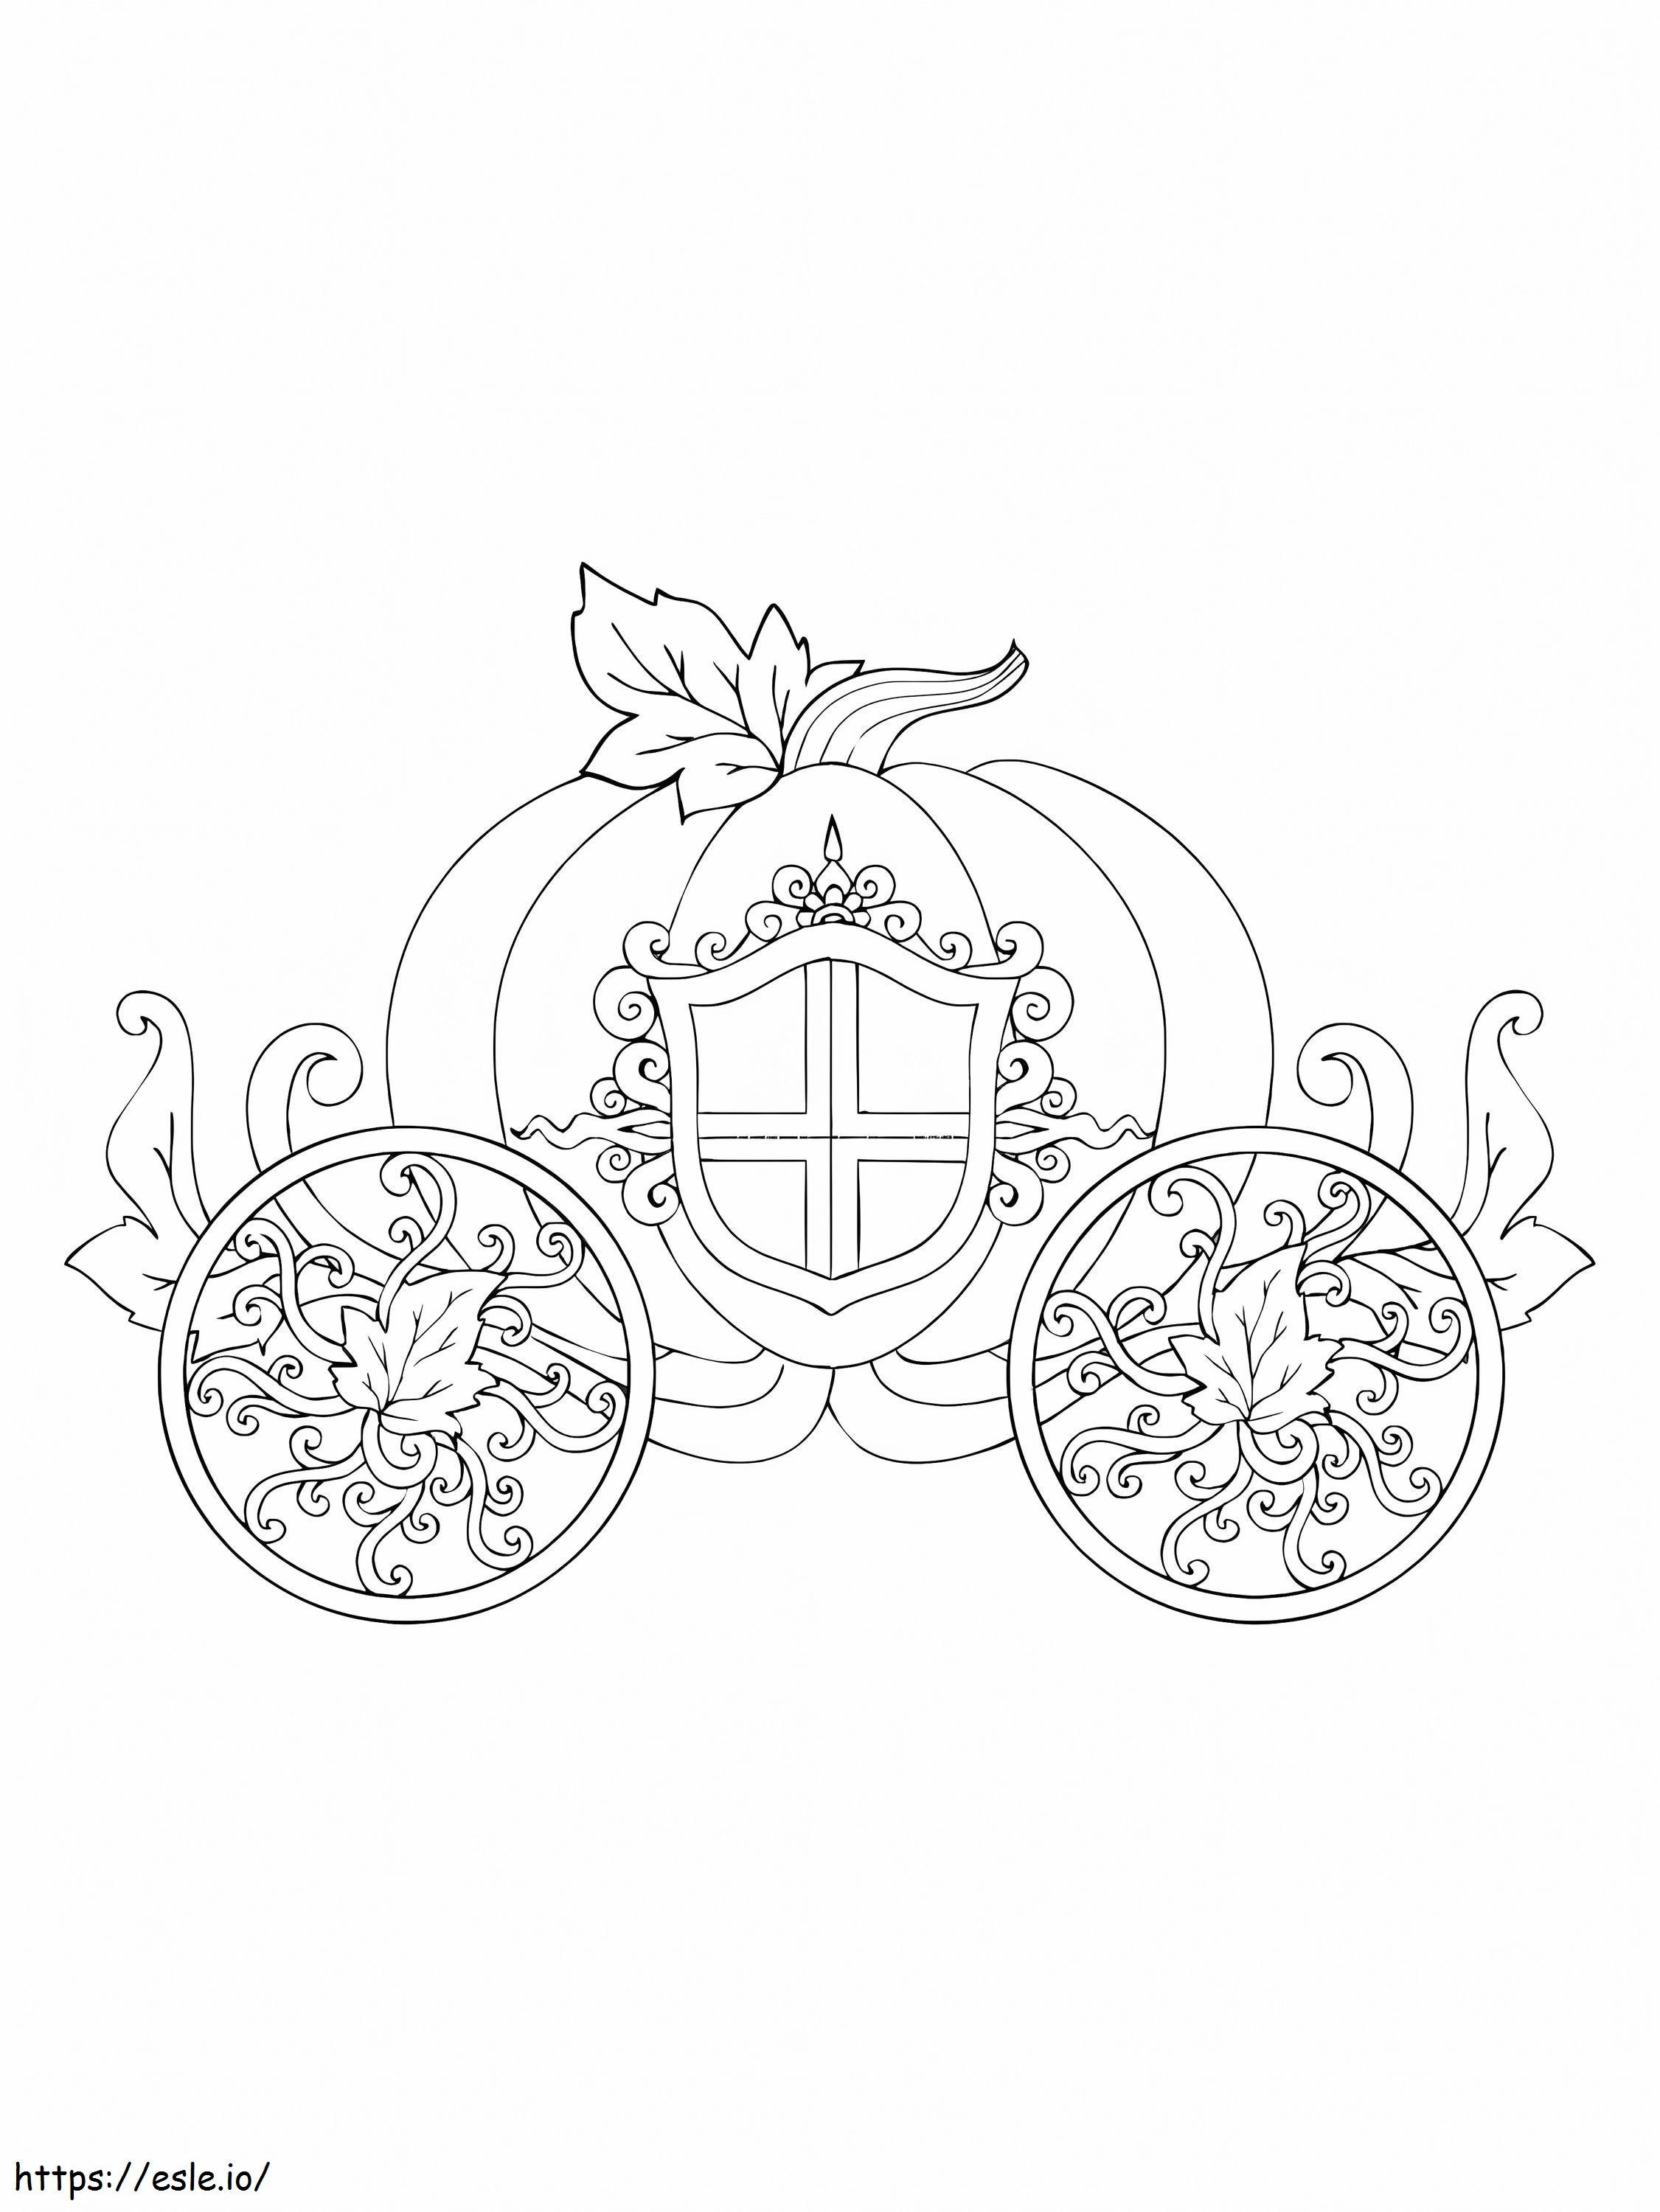 Pumpkin Carriage coloring page